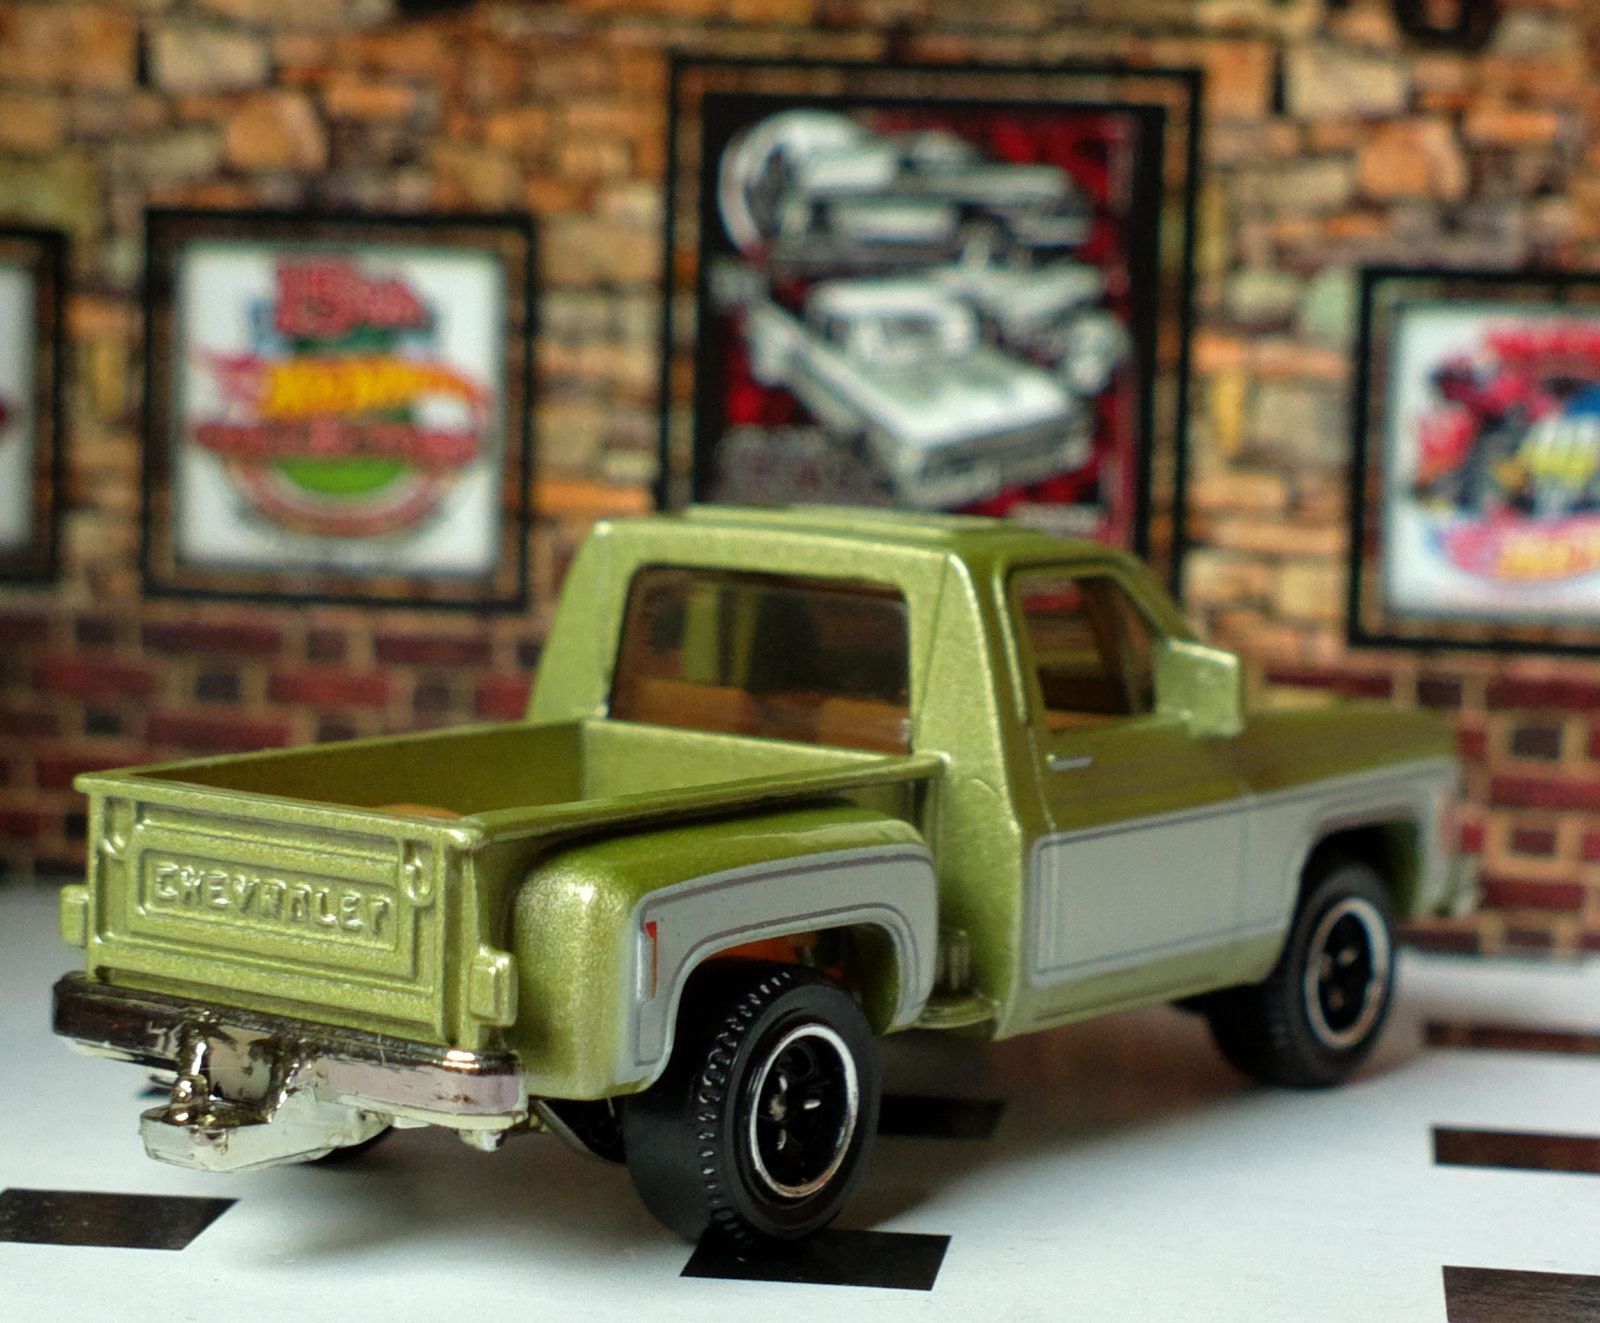 Illustration for article titled Truckin Tuesday - 1975 Chevy Stepside Truck (and bonus bugs)